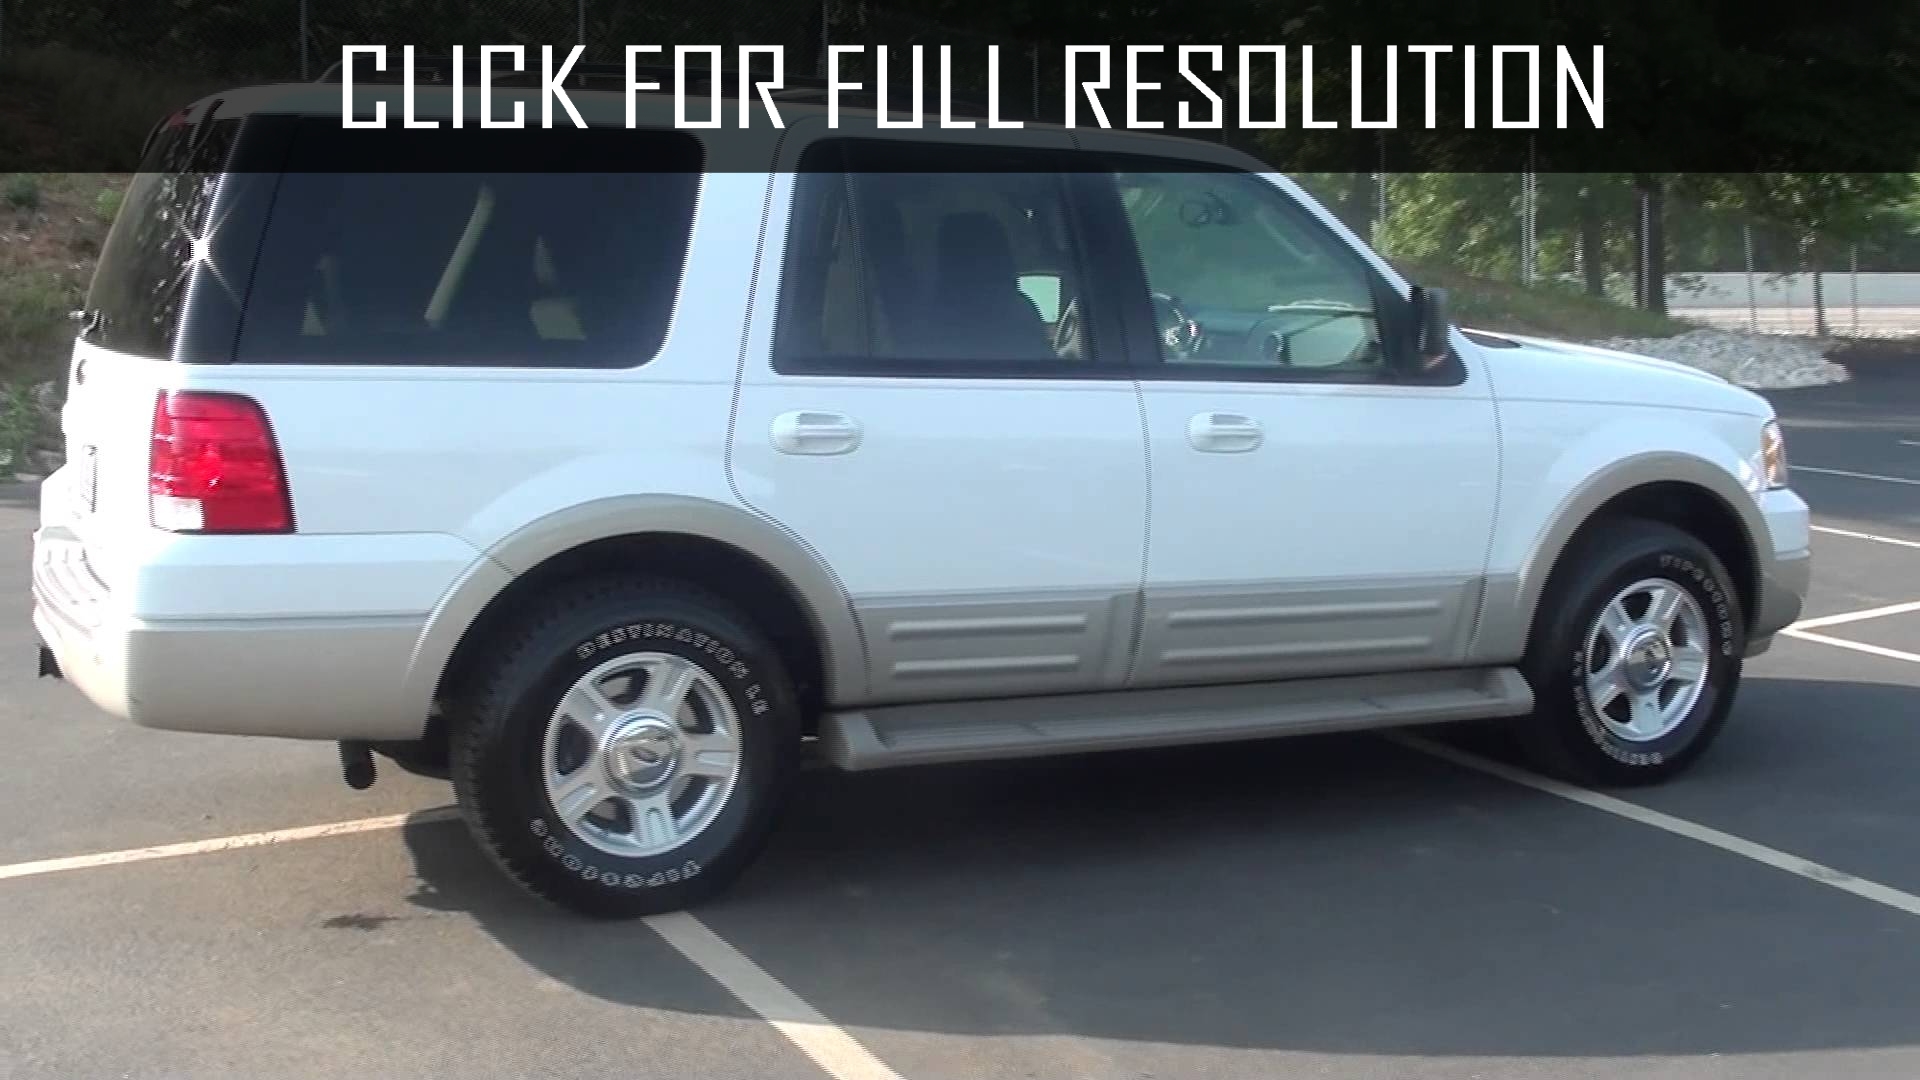 Ford Expedition 2005